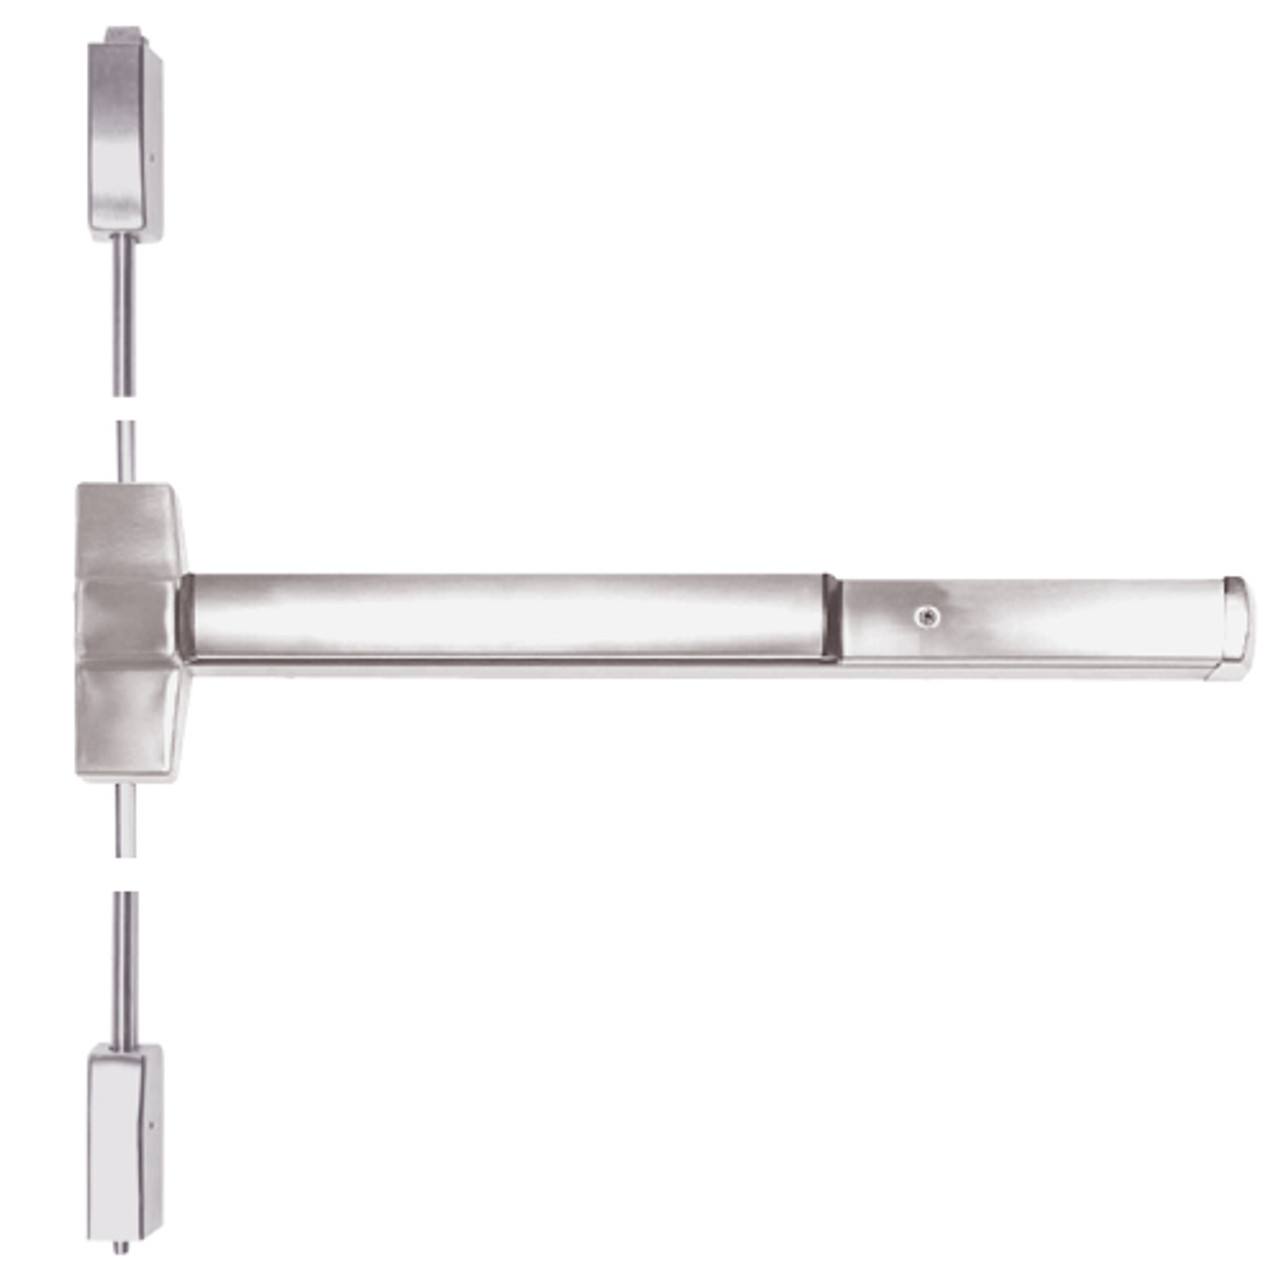 ED5470-630-M61 Corbin ED5400 Series Non Fire Rated Vertical Rod Exit Device with Exit Alarm Device in Satin Stainless Steel Finish